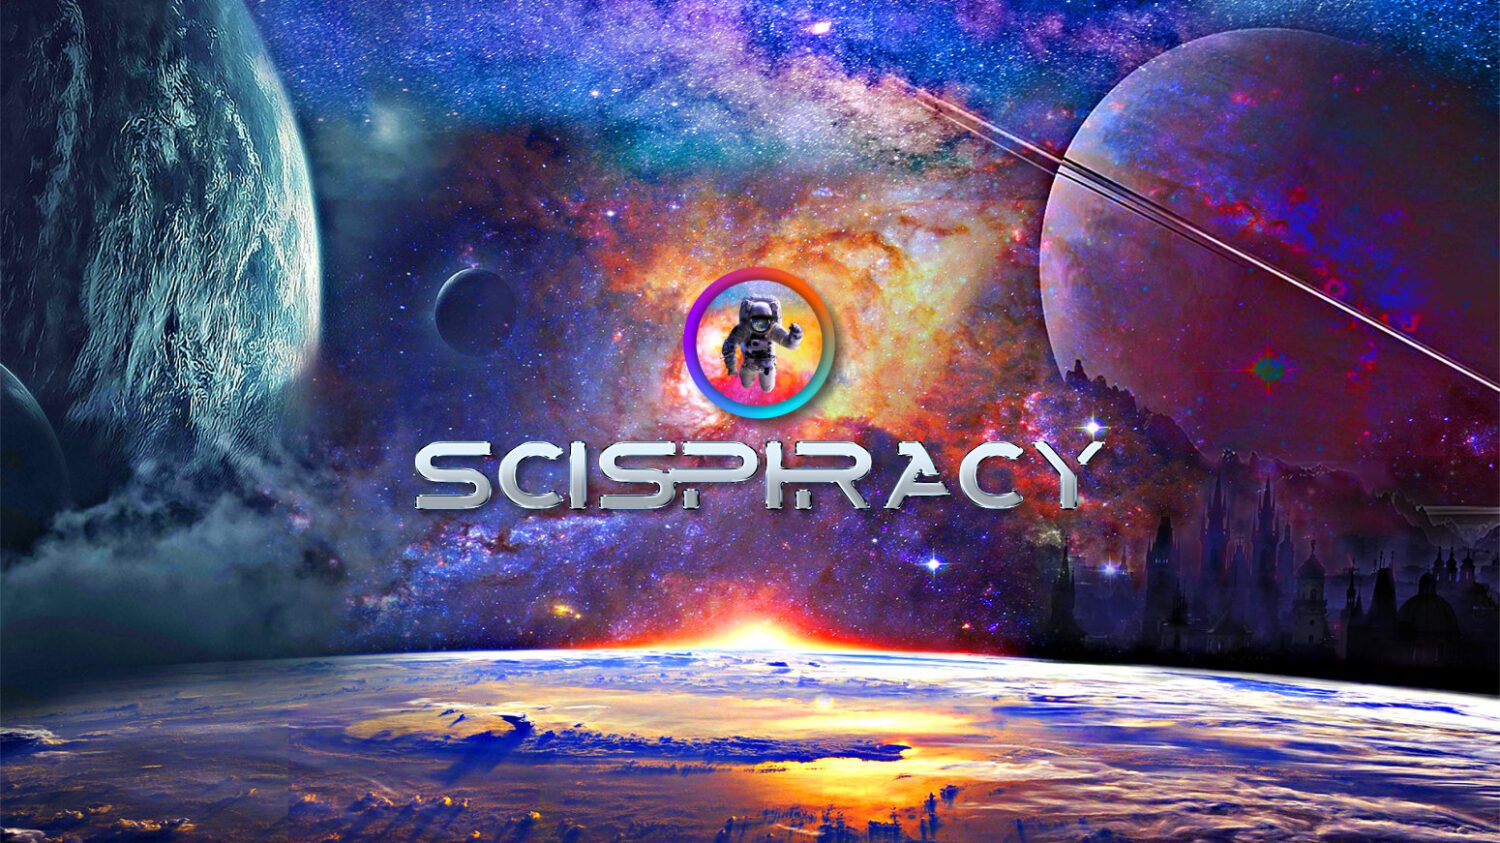 An astronaut in space floating above the word Scispiracy, with view of Earth below and two planets on both sides, with a colorful galaxy in the background.